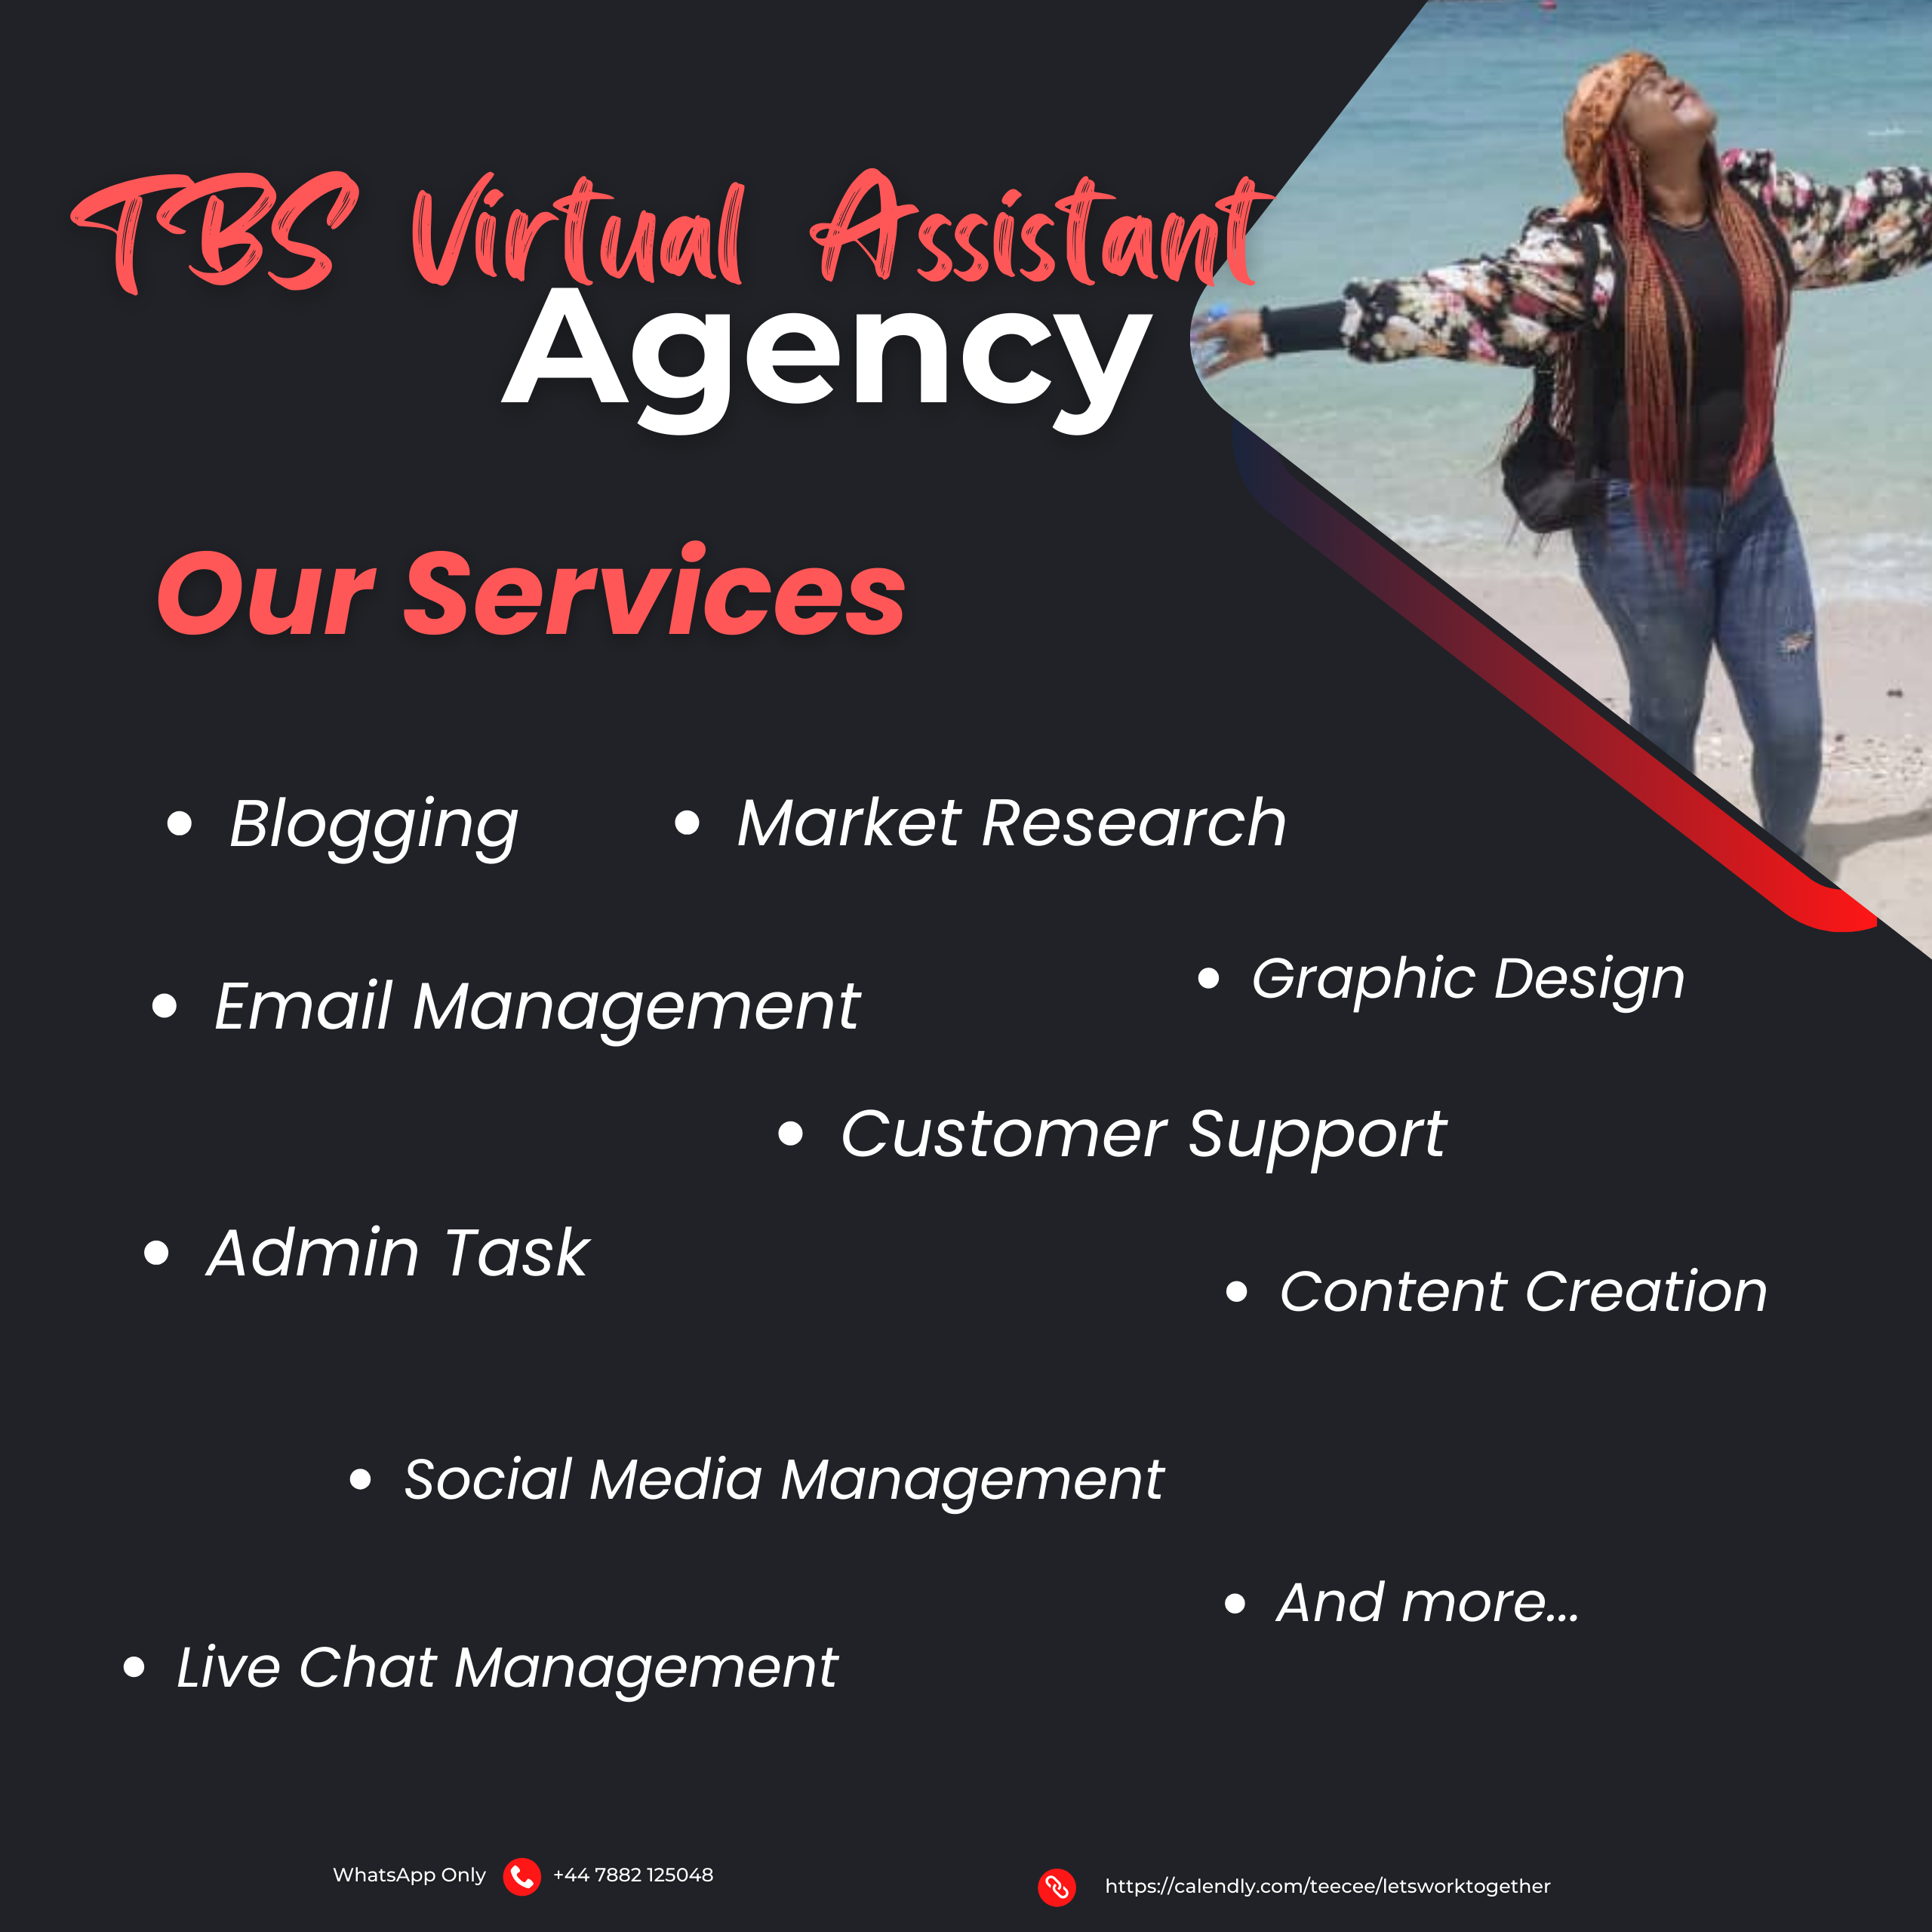 TBS Virtual Assistant Agency